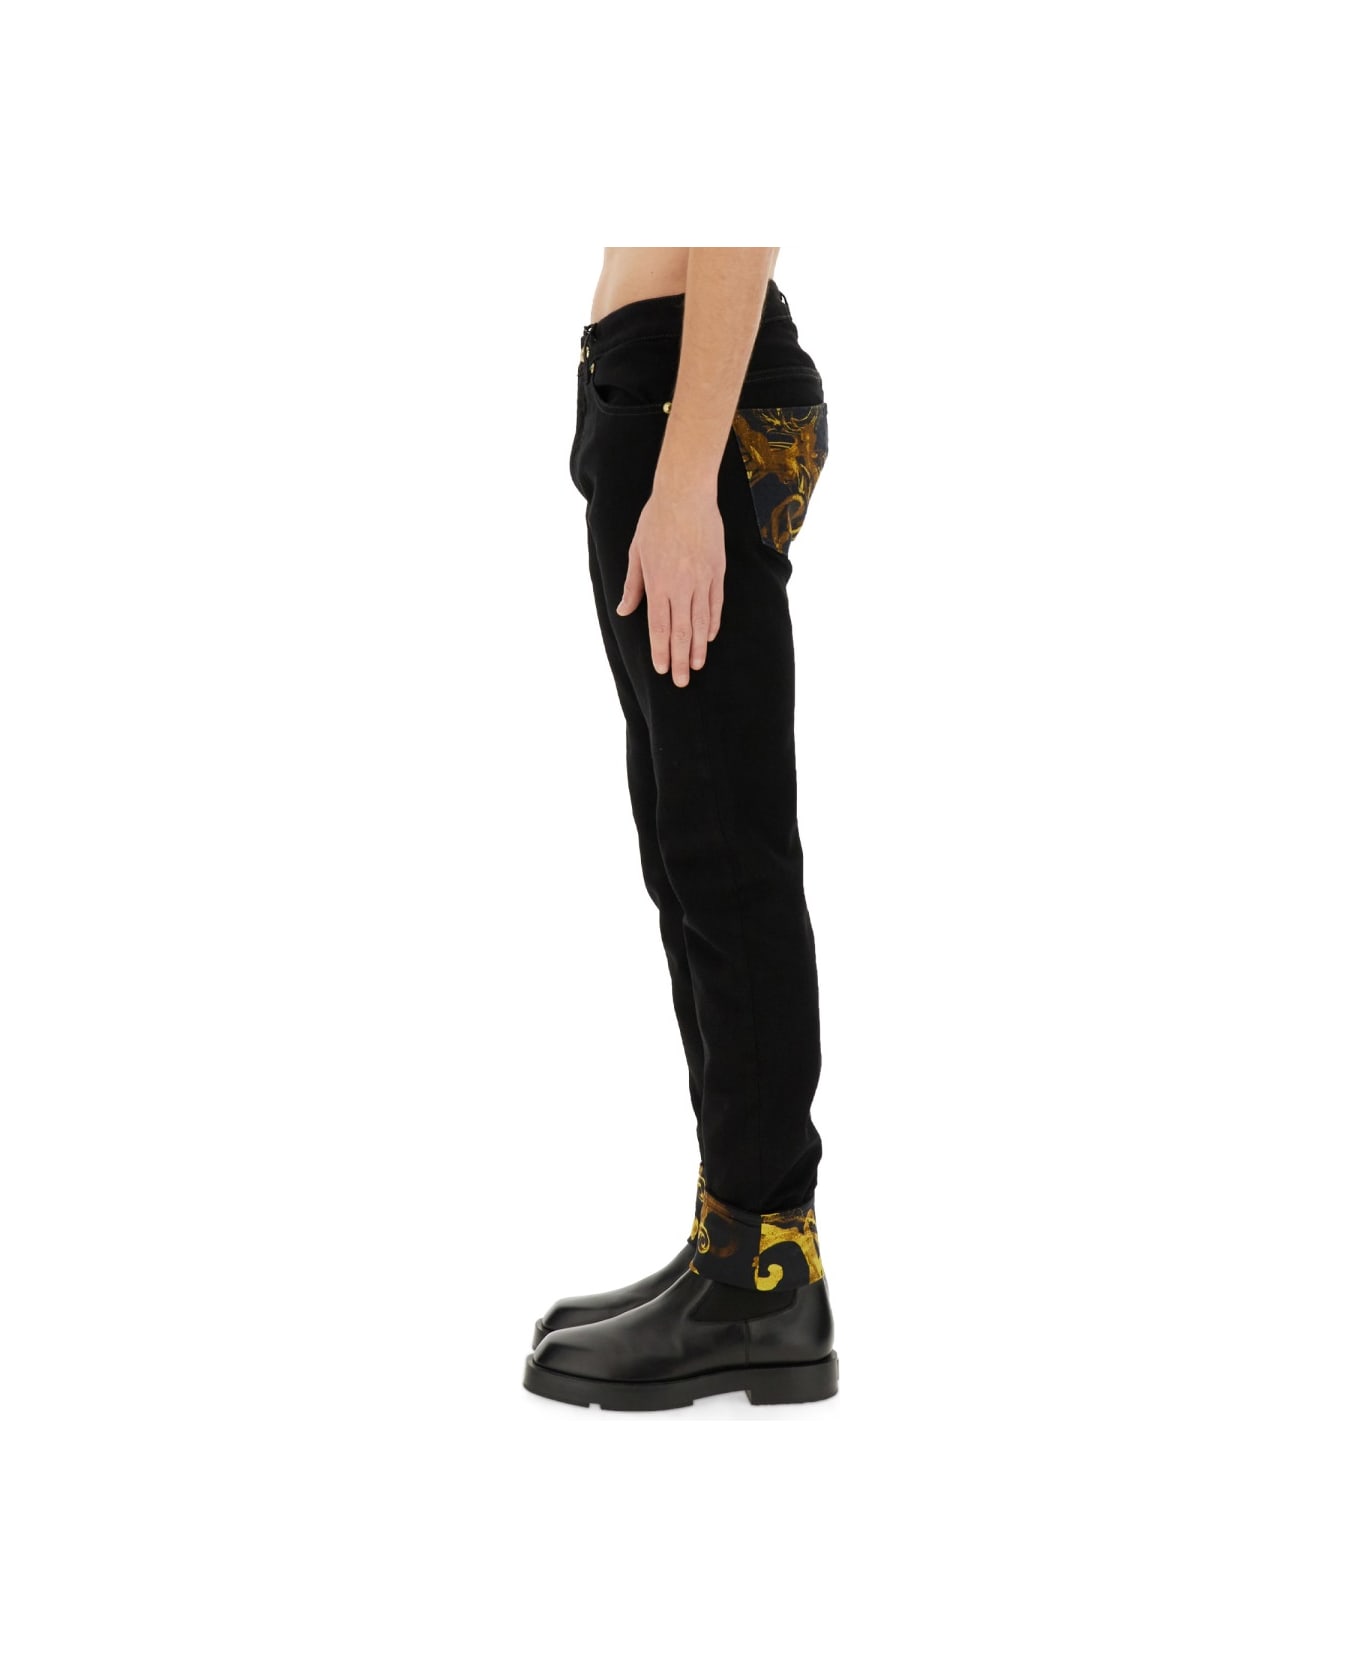 Versace Jeans Couture Jeans With Print - BLACK